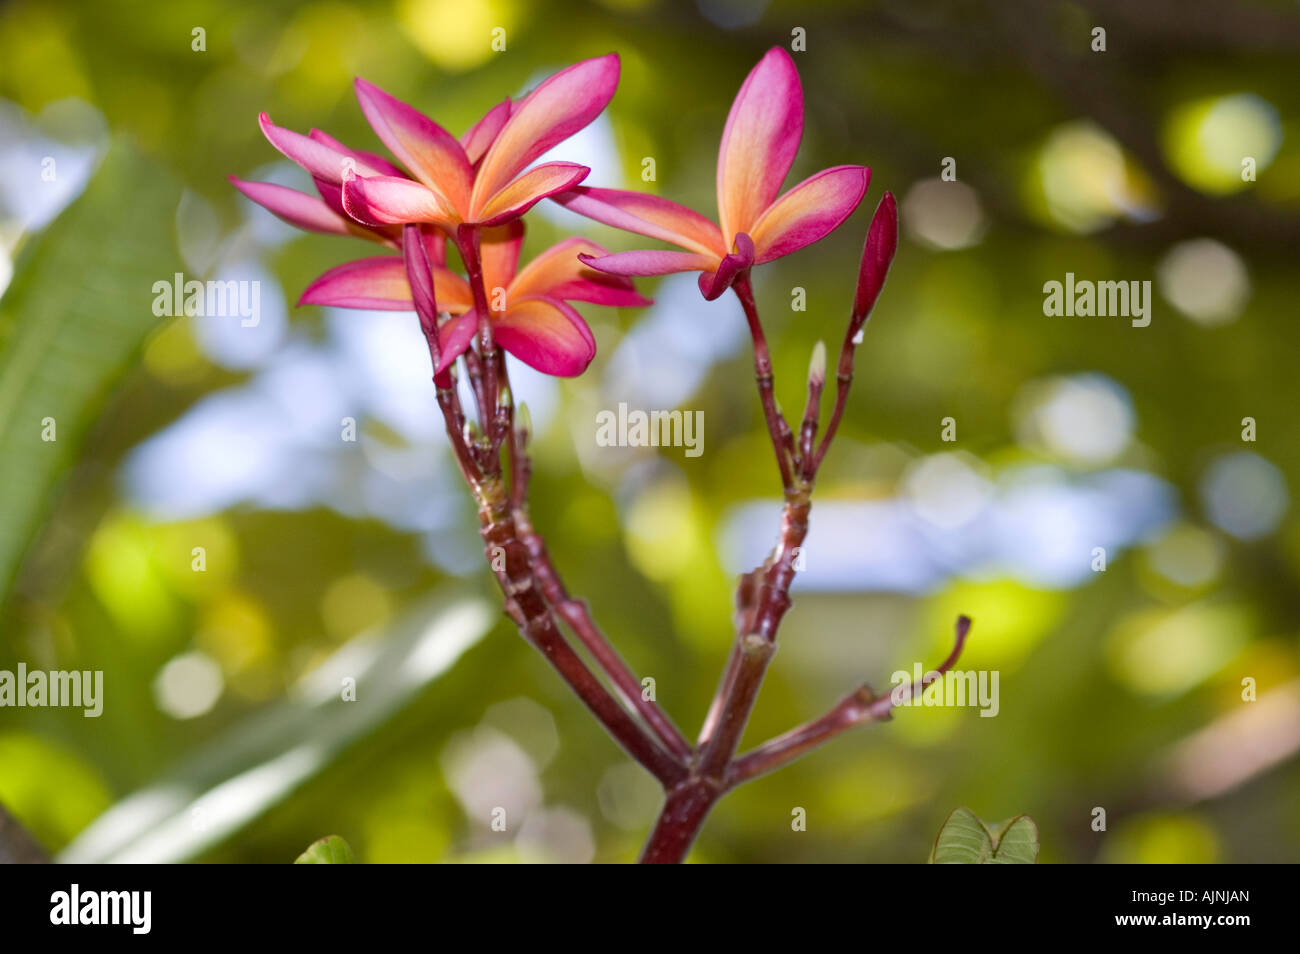 Pink or Red Plumeria Genus var Frangipani flower from the Apocynaceae Family Stock Photo